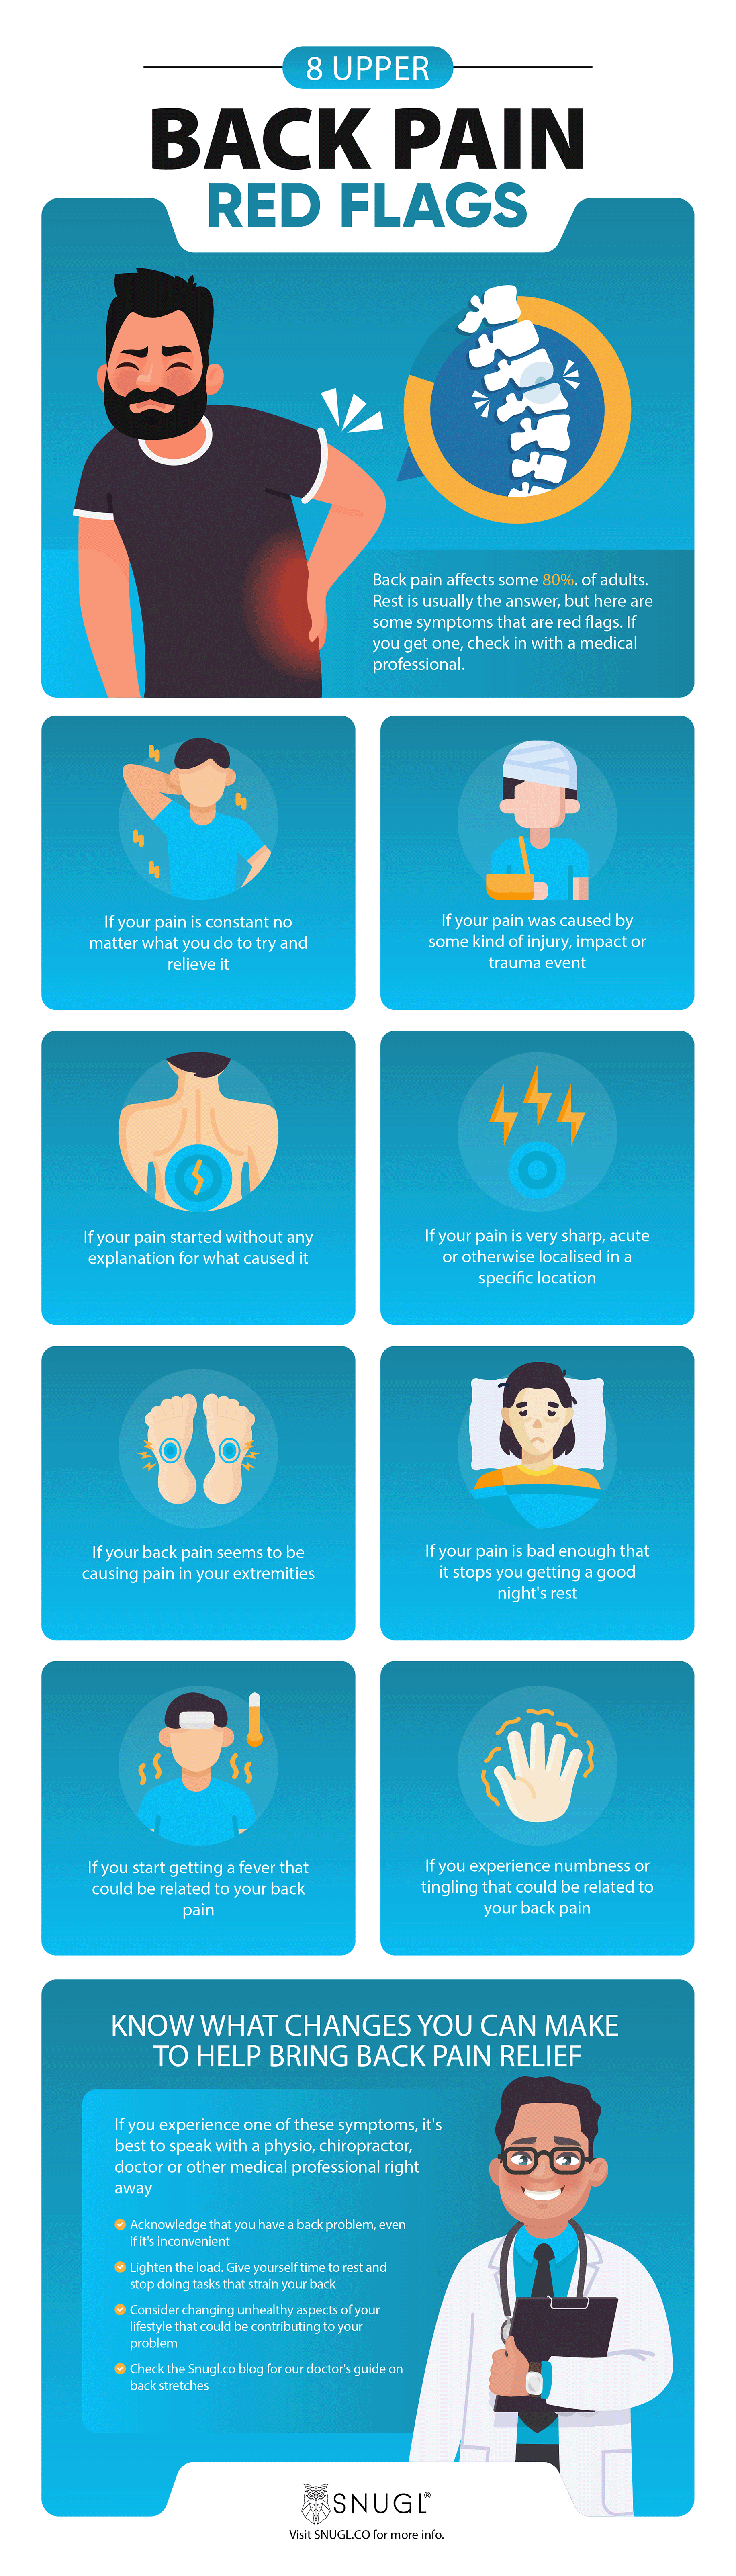 An infographic summarising all of the upper back pain red flags mentioned in the article.